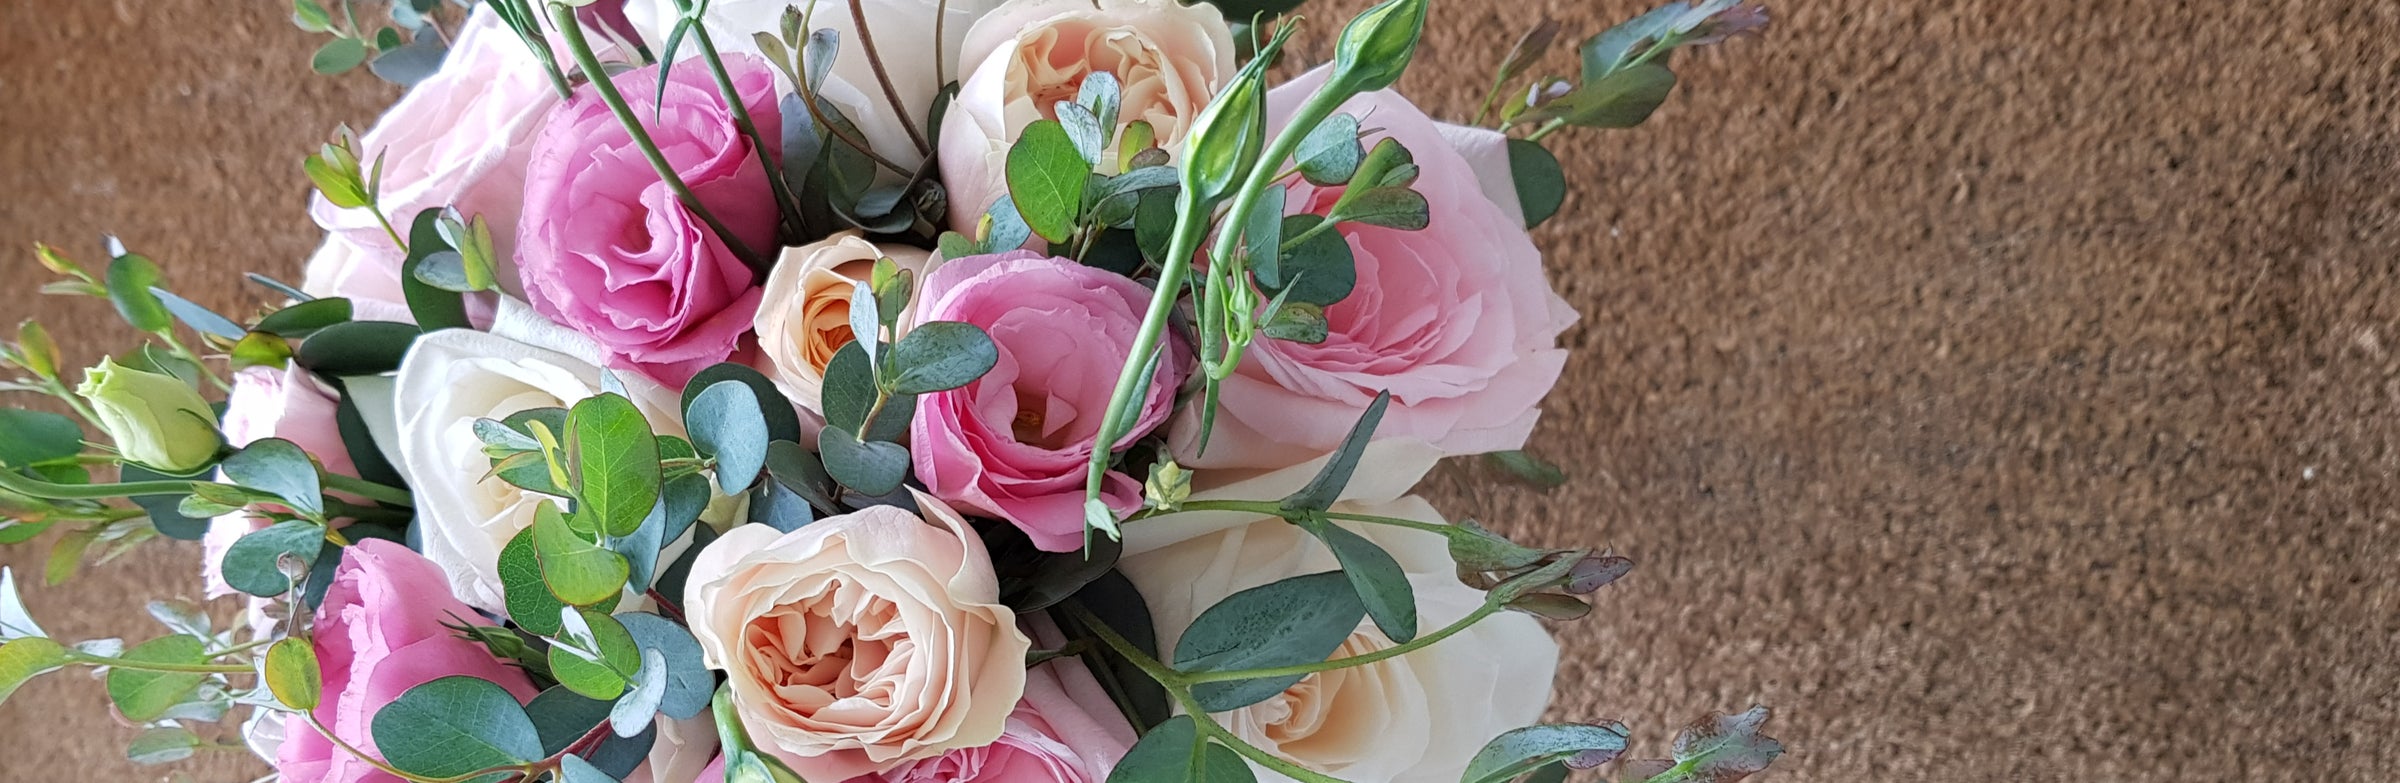 Warners Bay Florist Flower Delivery To